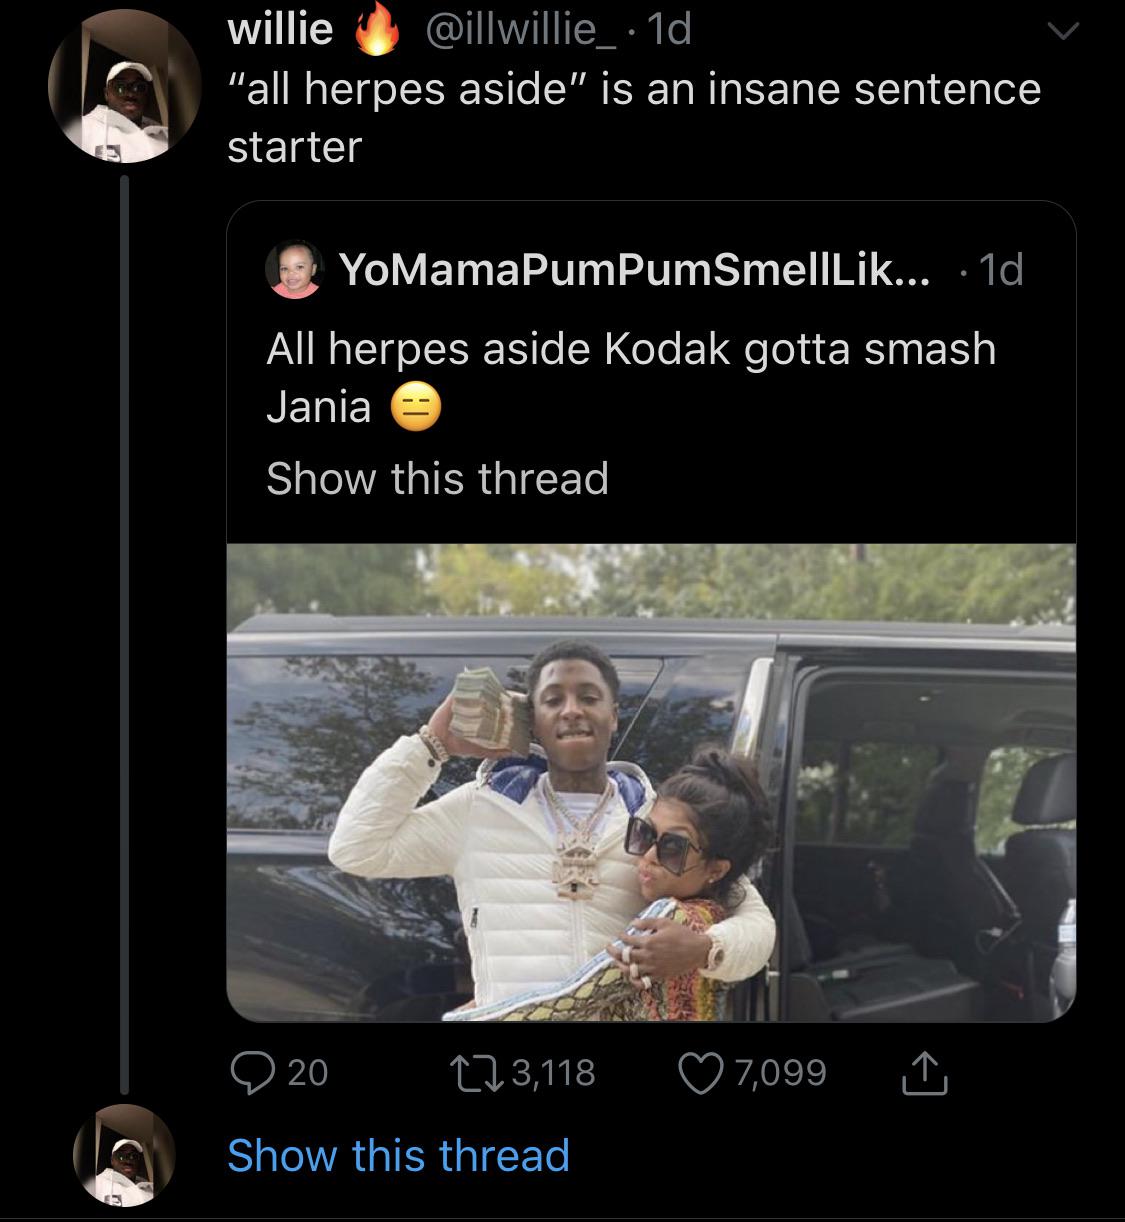 twitter post about herpes